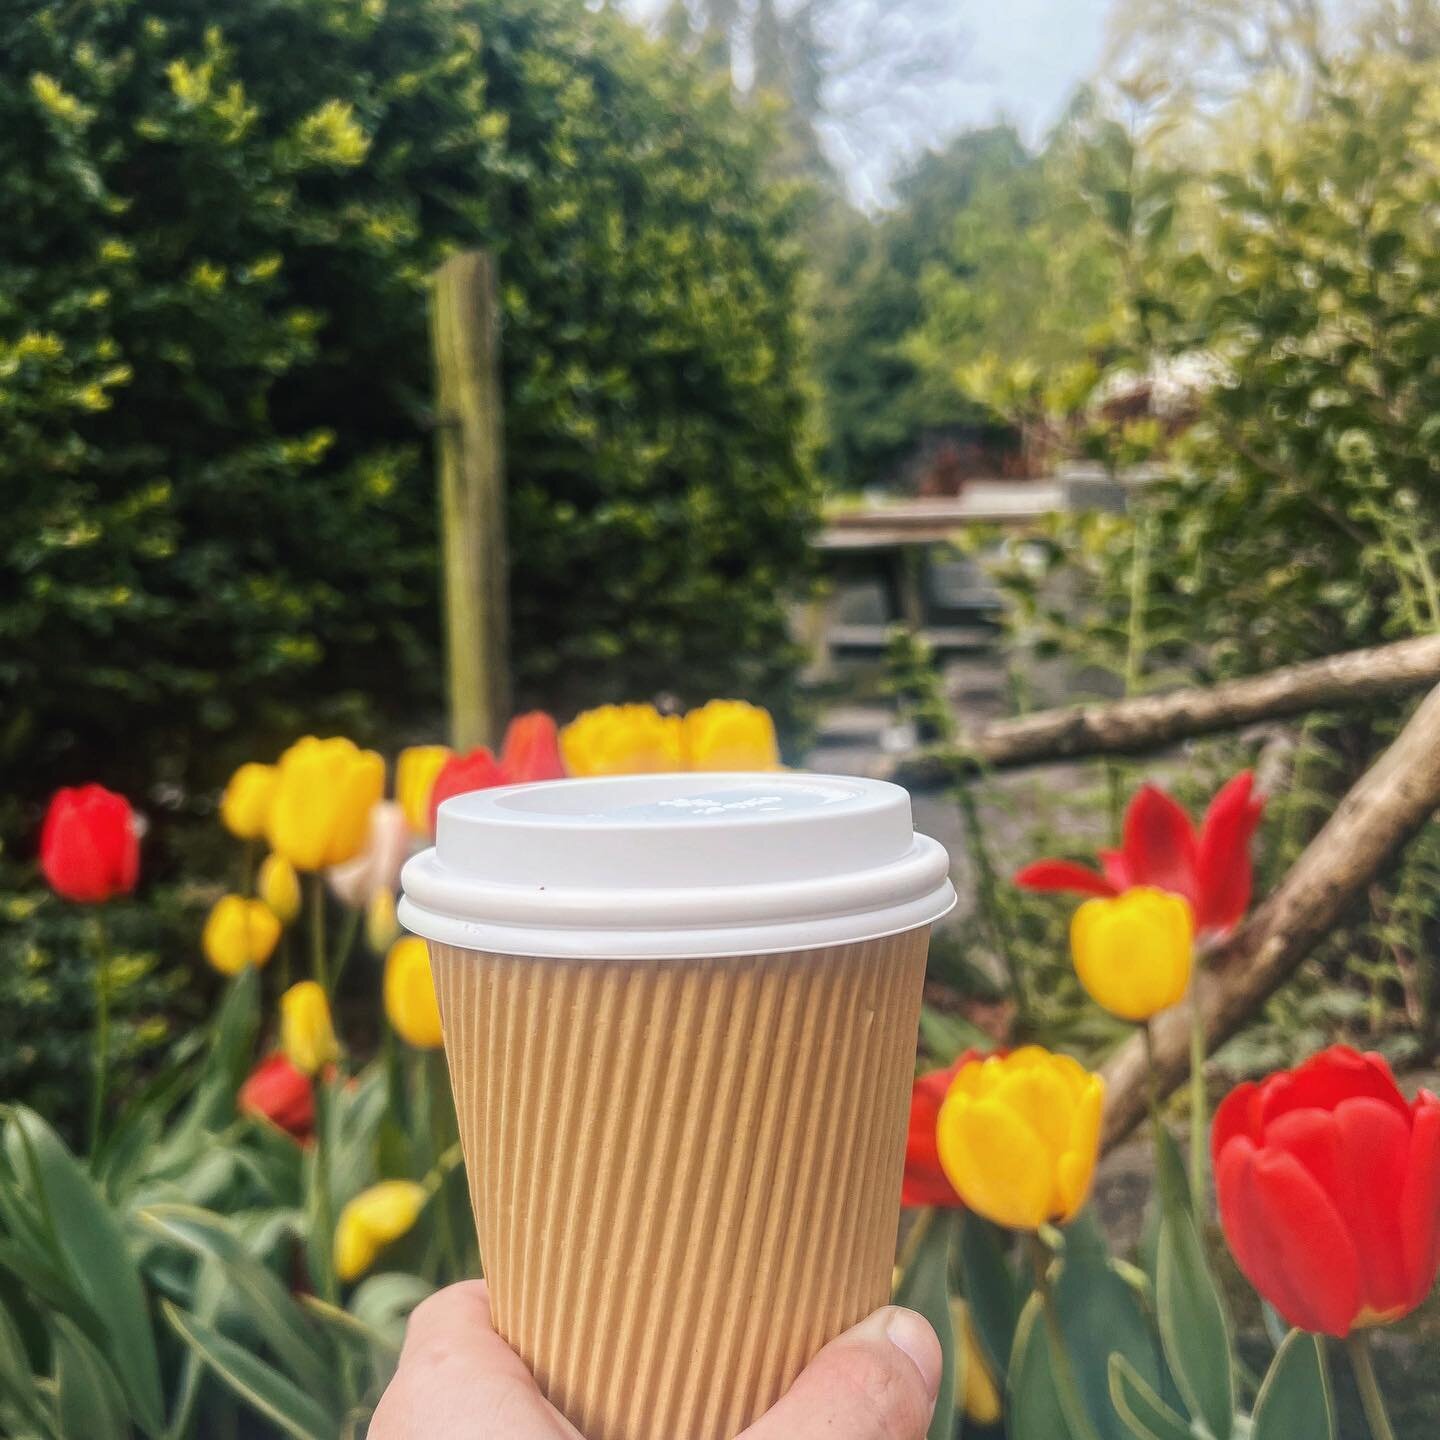 ᴍᴏʀɴɪɴɢ ᴡᴀʟᴋ &amp; ᴀ sᴛʀᴏʟʟ. 

Nothing beats a fresh cup of coffee and a walk in the fresh air. If you wander around our gardens and retailers you will notice lots of pretty blooms popping up all around our estate. 
.
.
.
.
.
#wyresdale #wyresdalepar